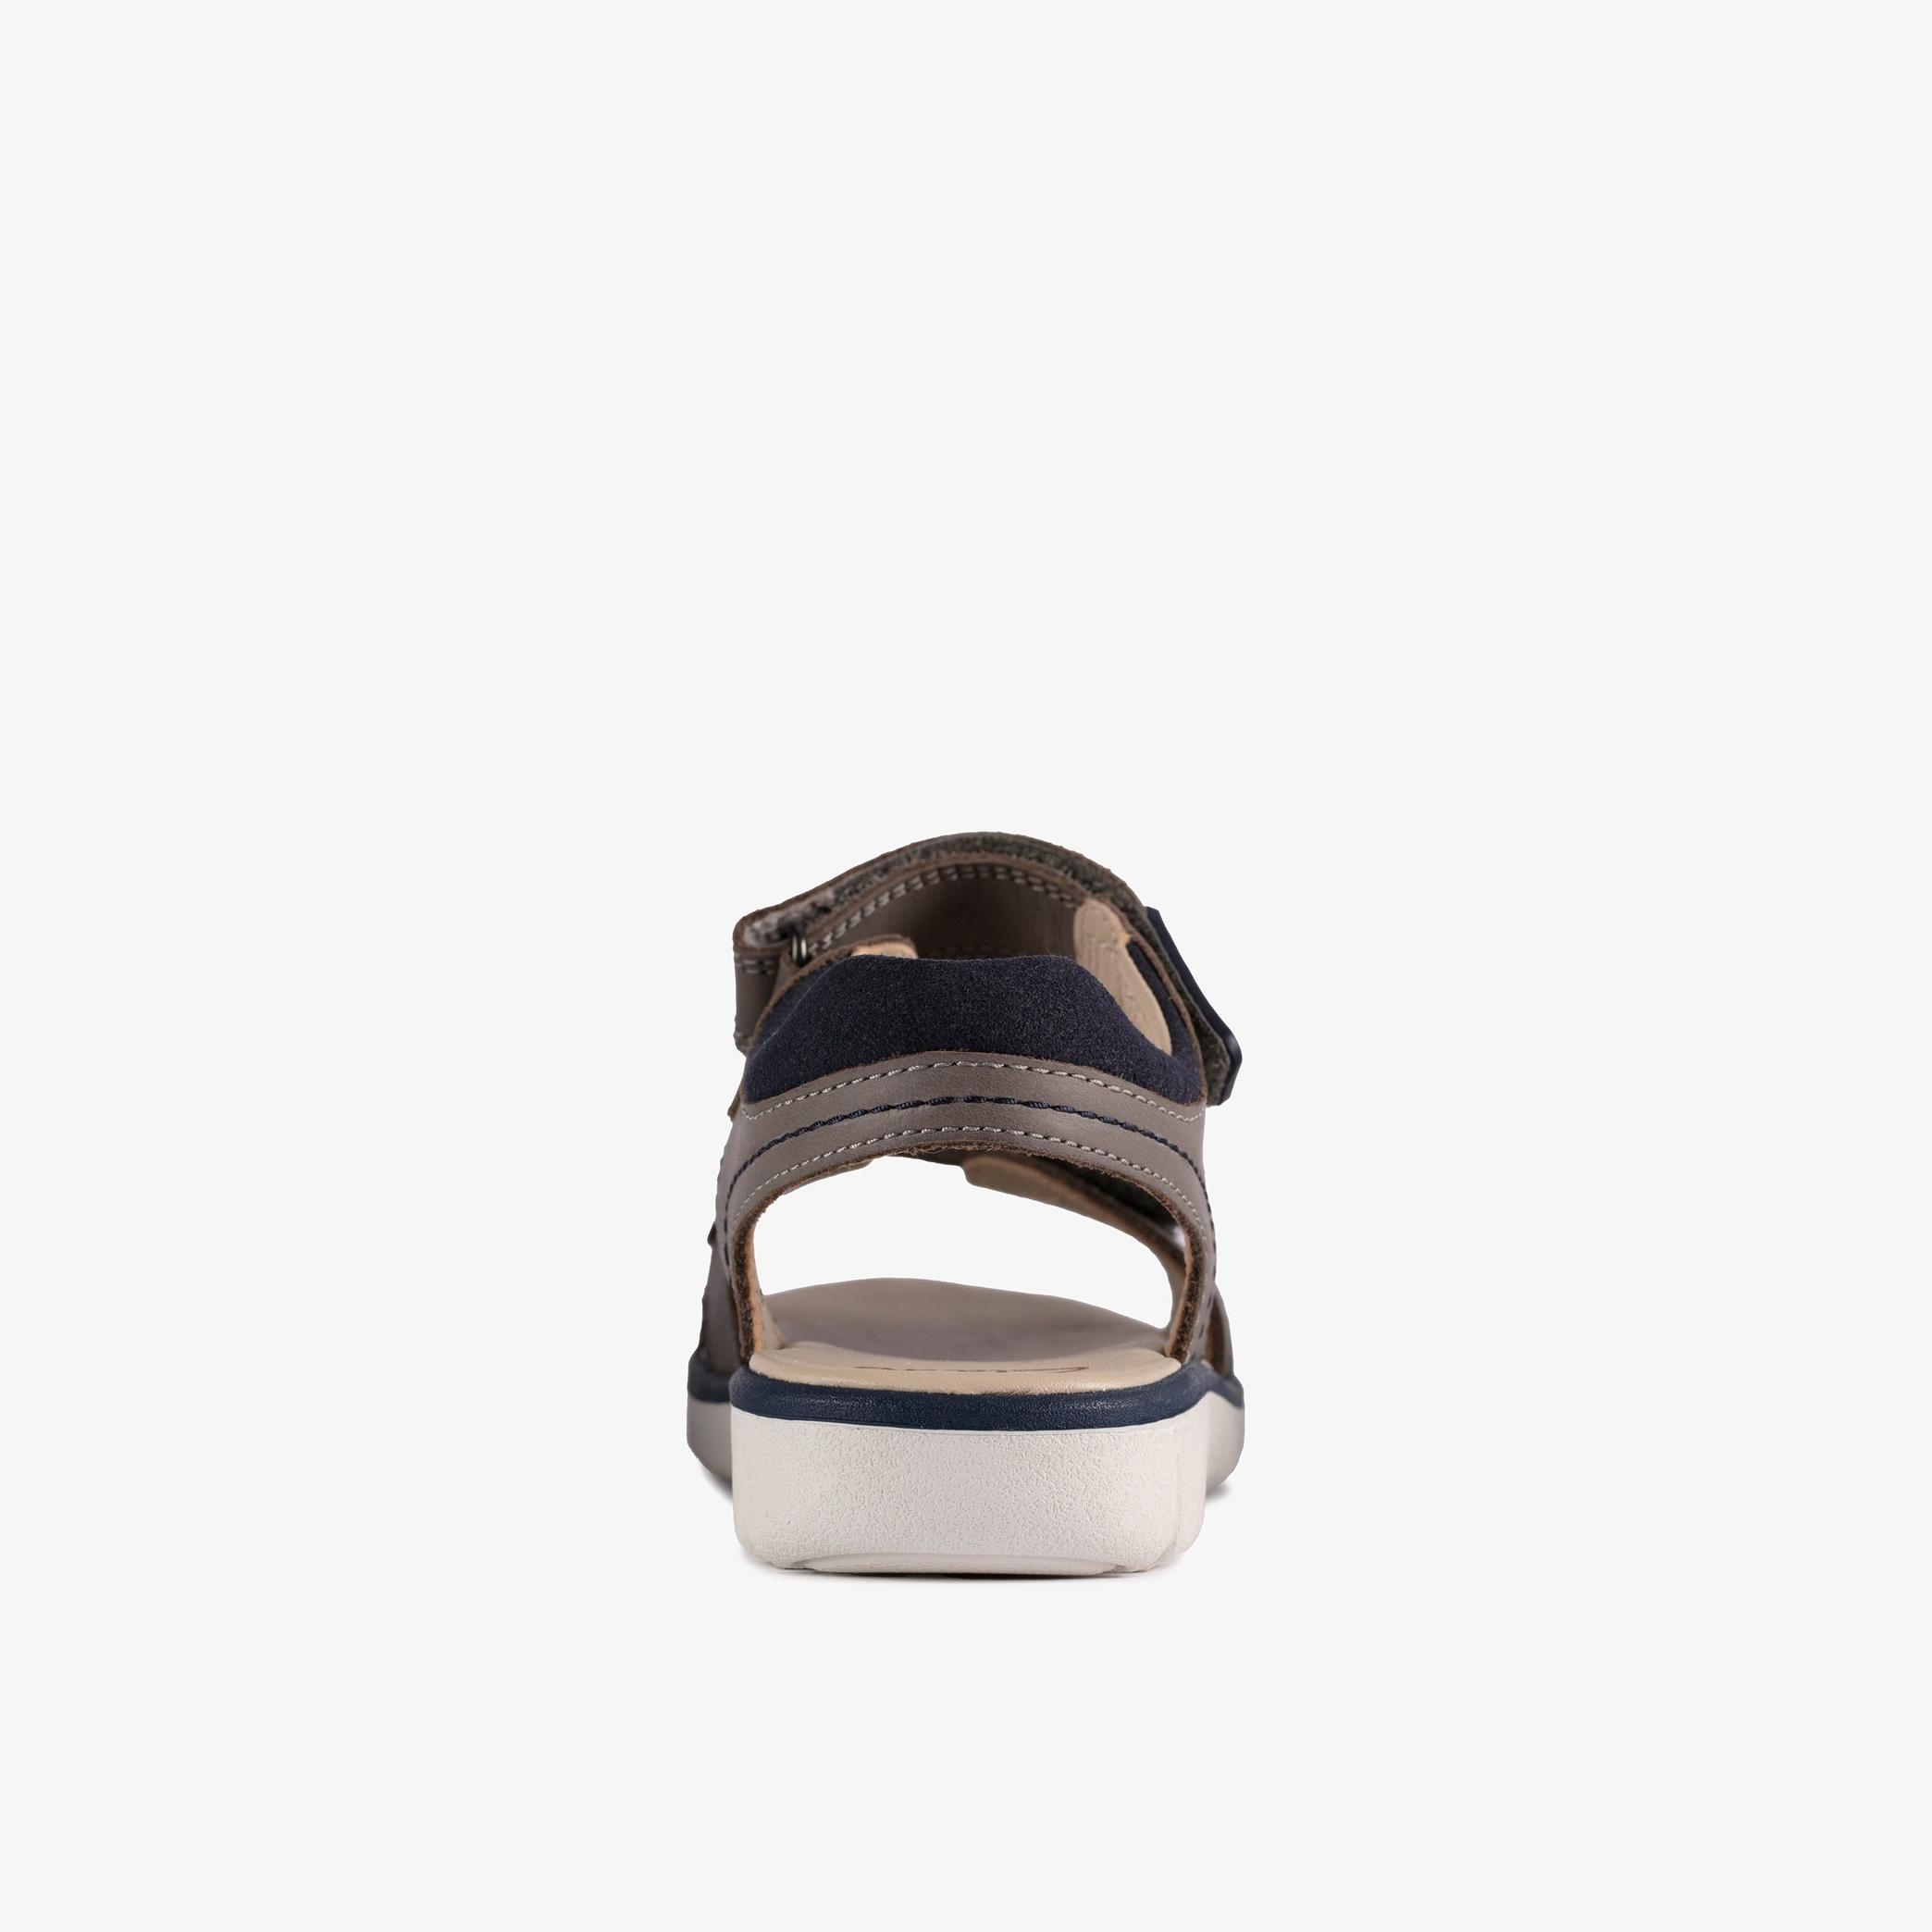 Roam Surf Youth Grey Combination Flat Sandals, view 5 of 6